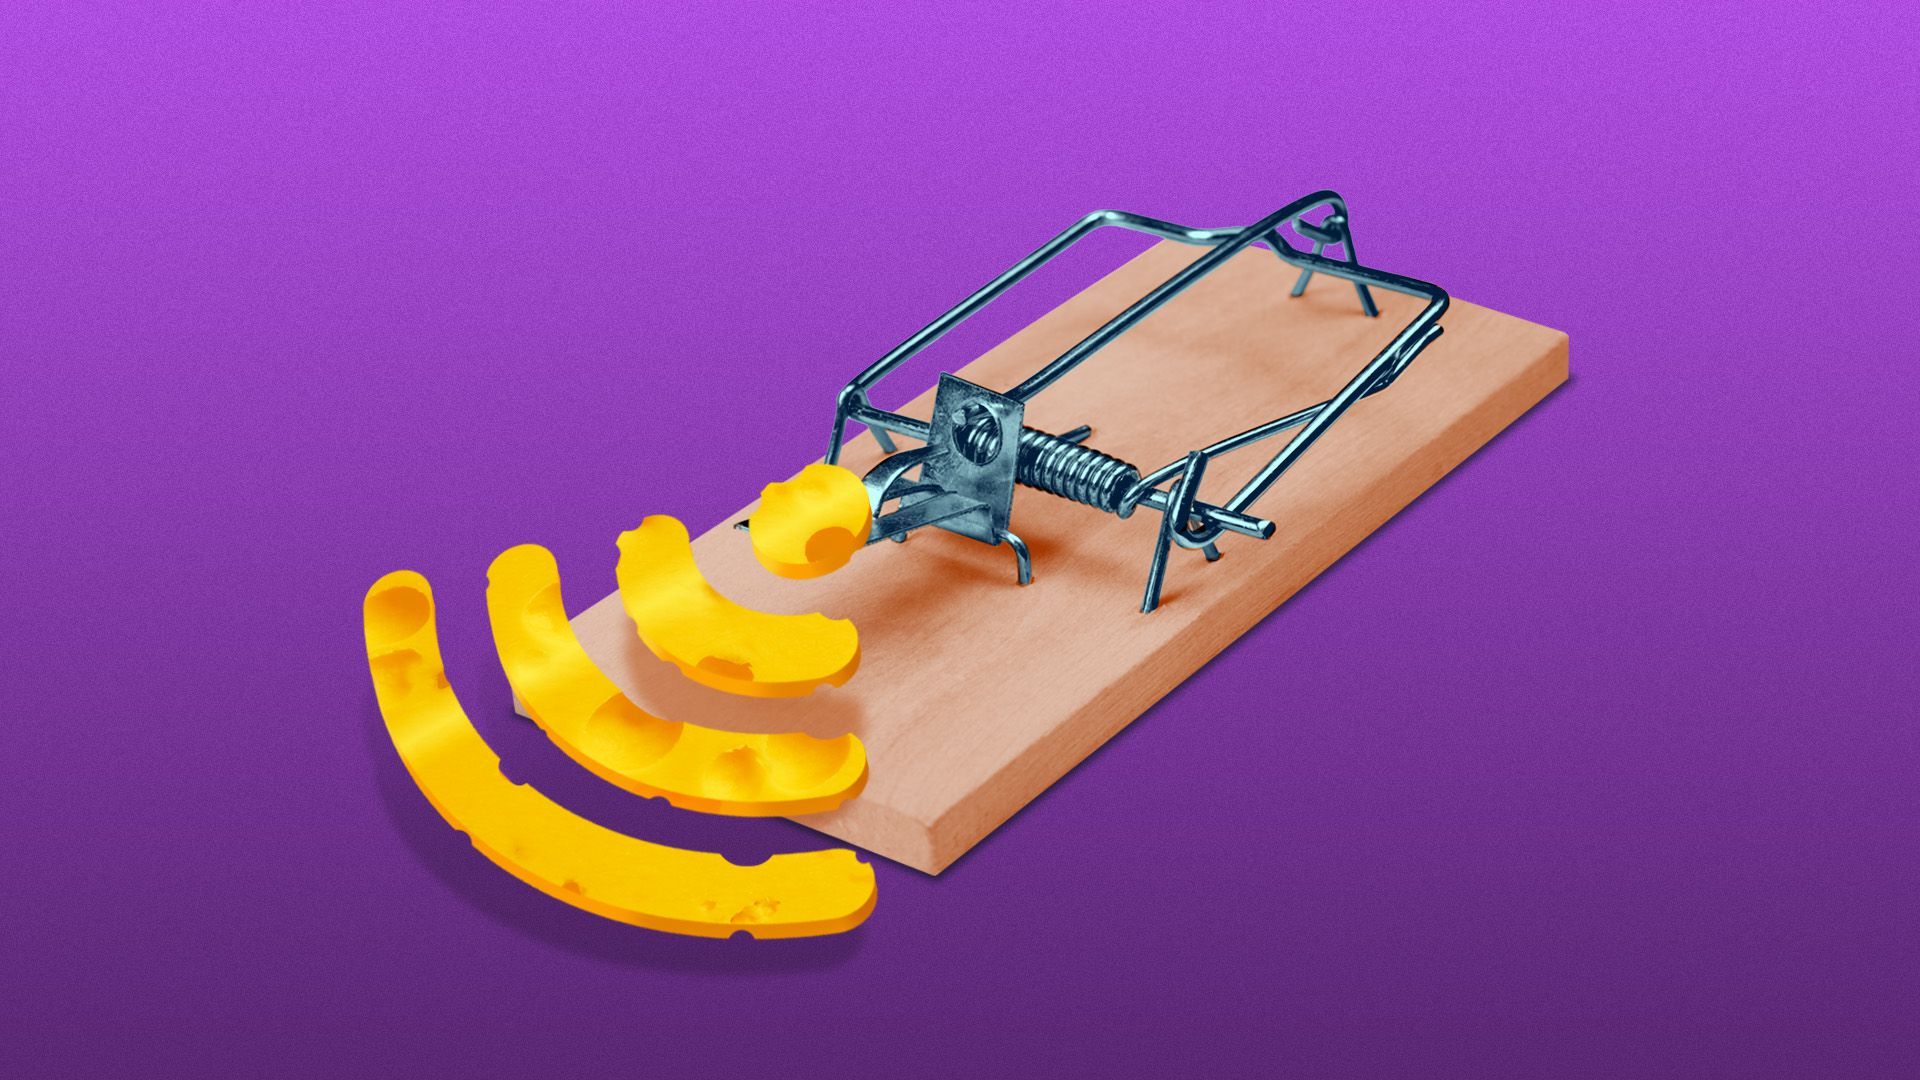 Illustration of a mouse trap with a wifi icon-shaped cheese